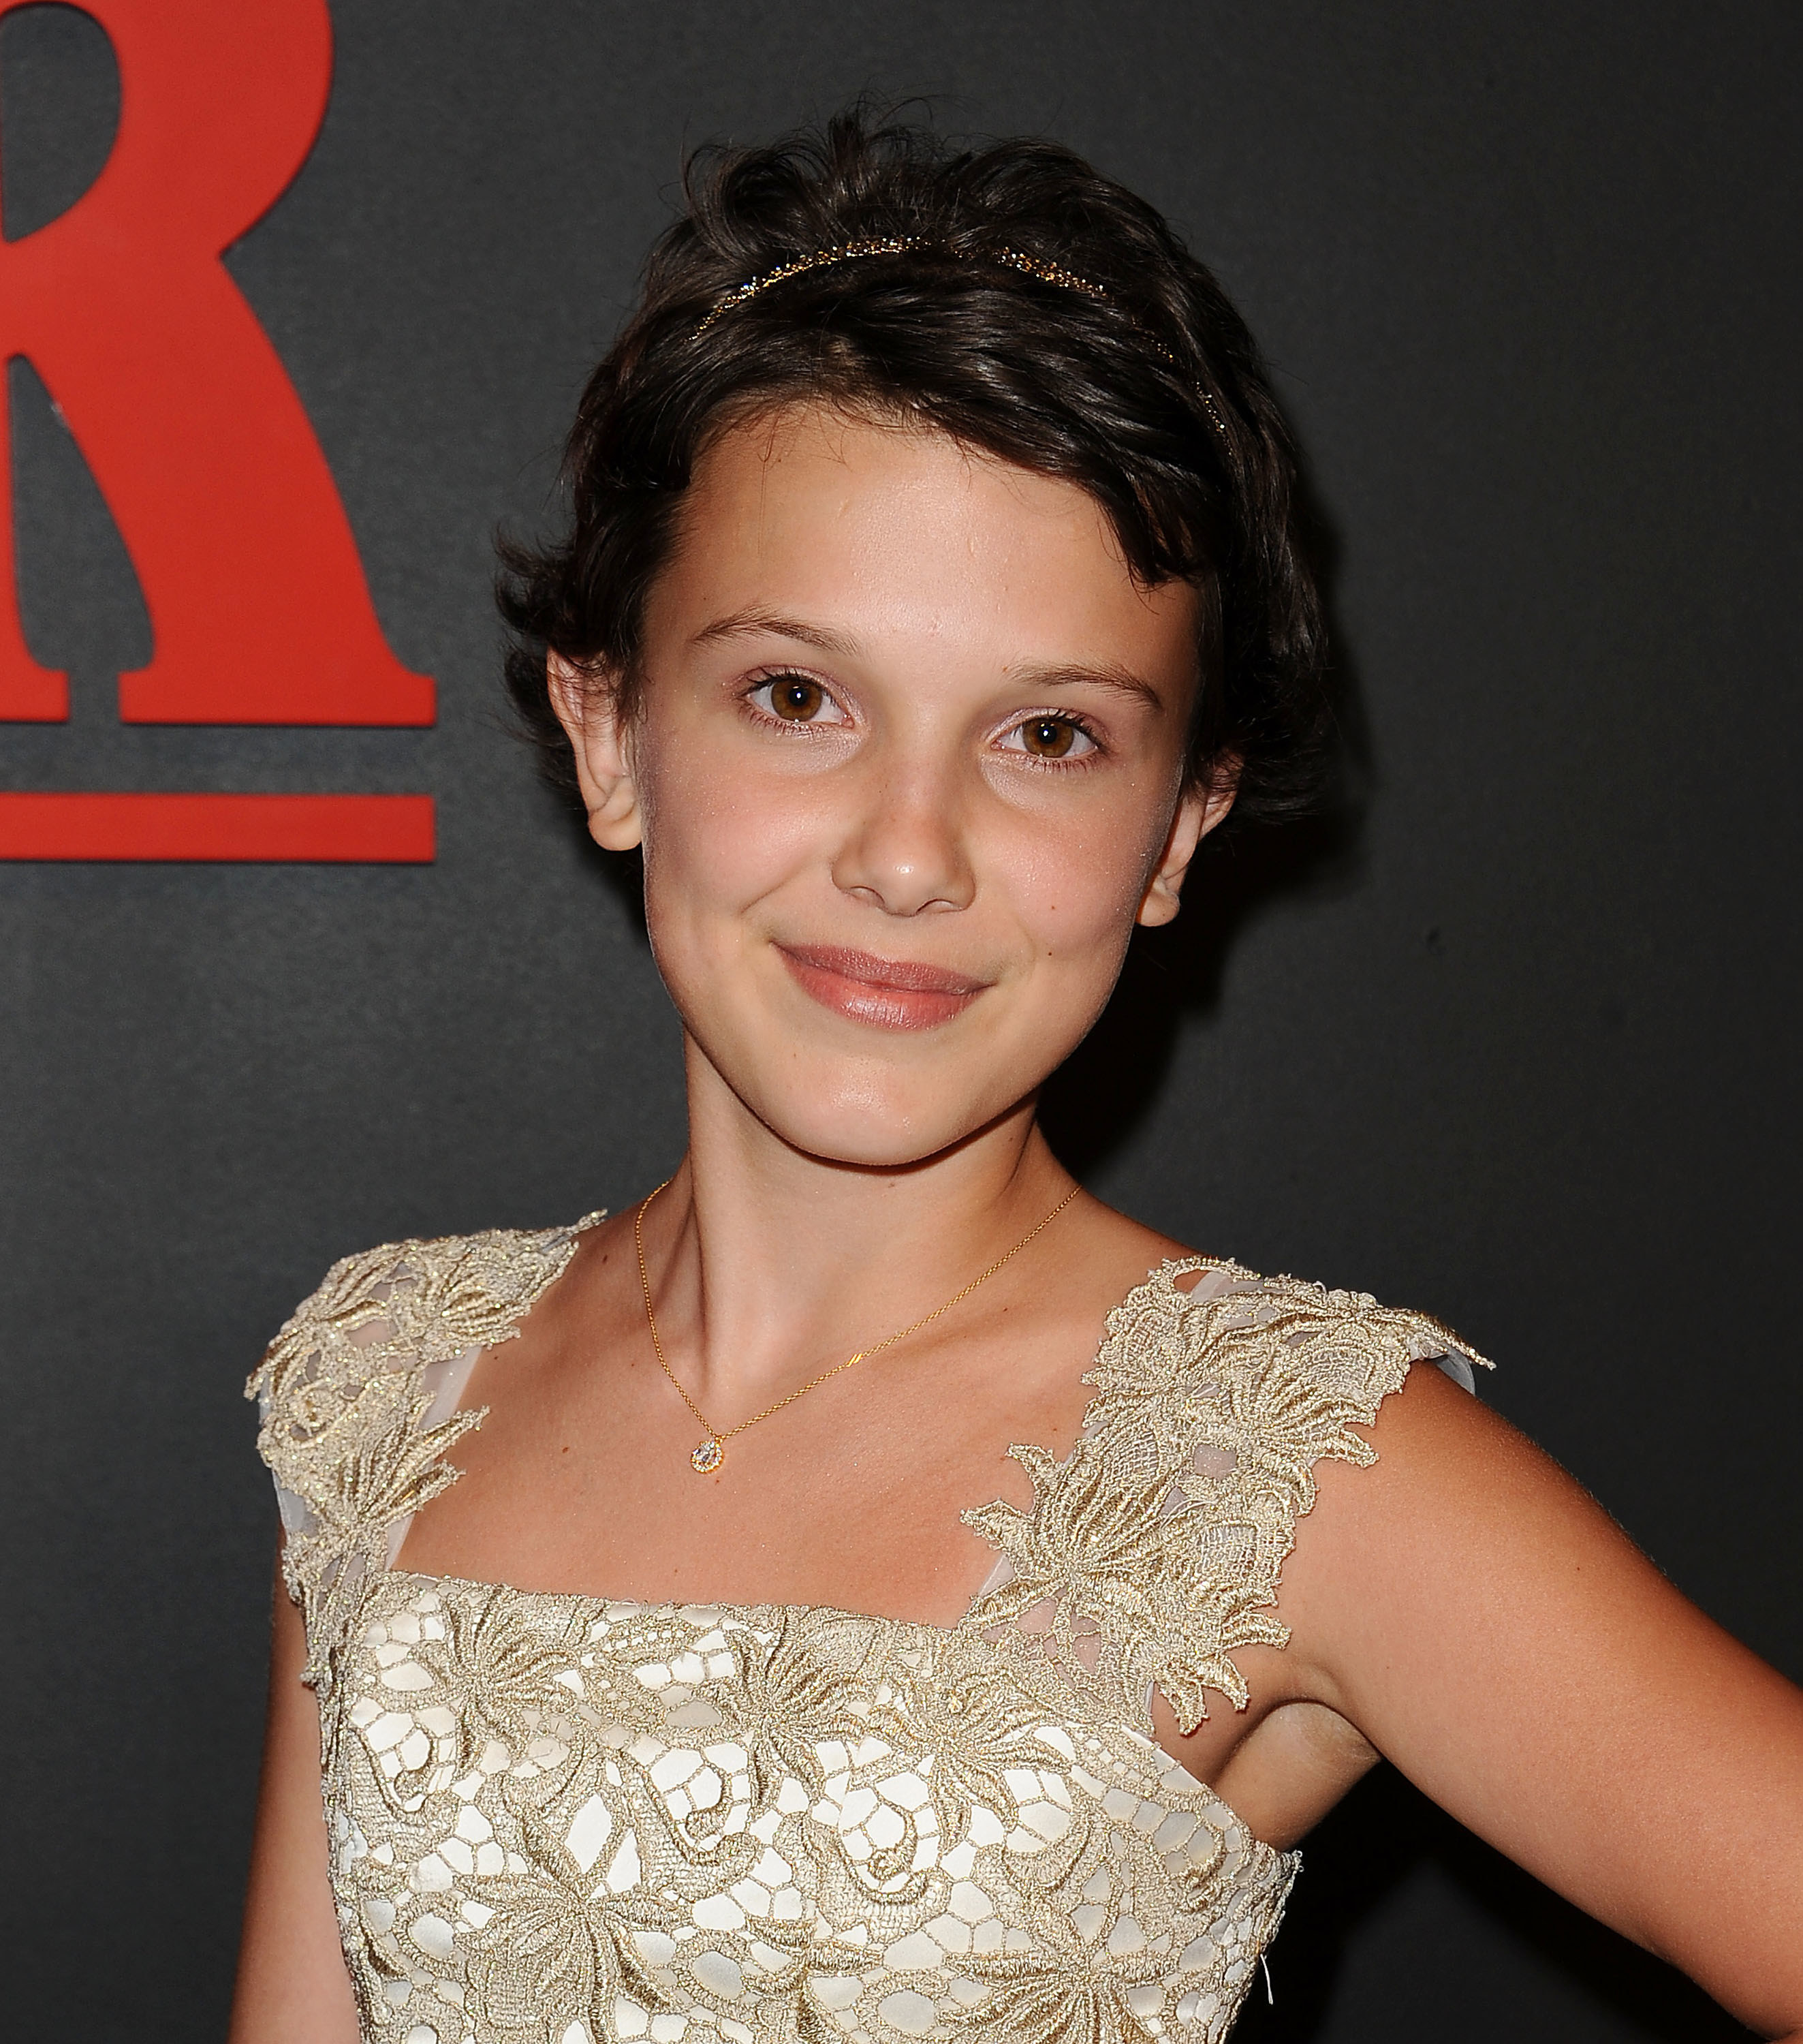 Millie Bobby Brown Age 18